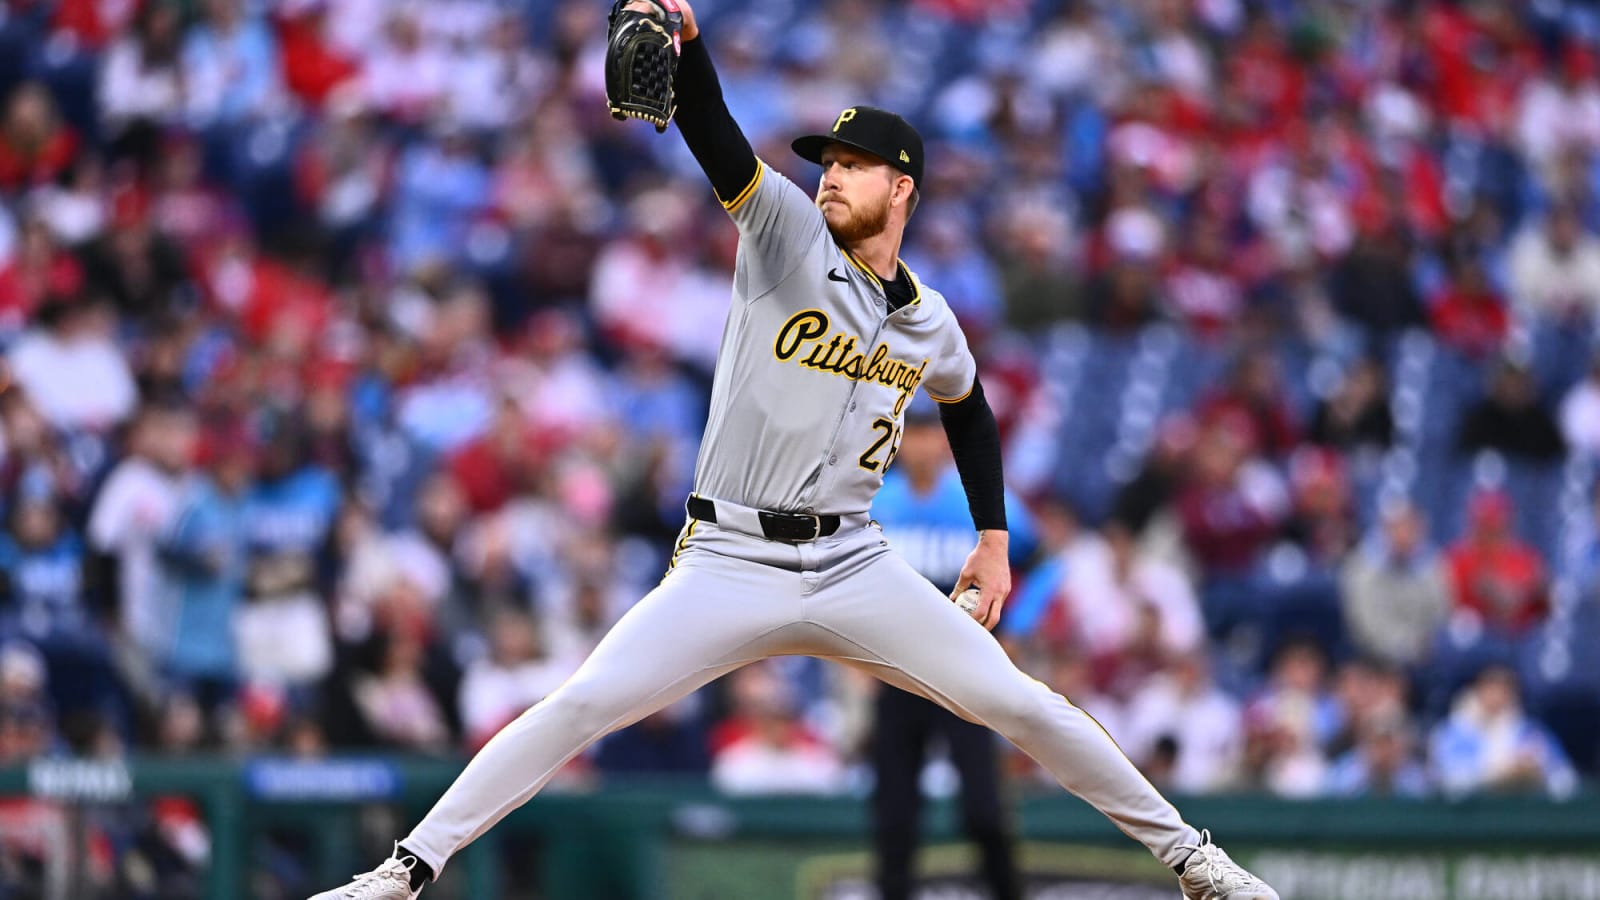 Falter Delivers Second-Straight Strong Start, Bednar Seals Pirates’ Win Over Phillies